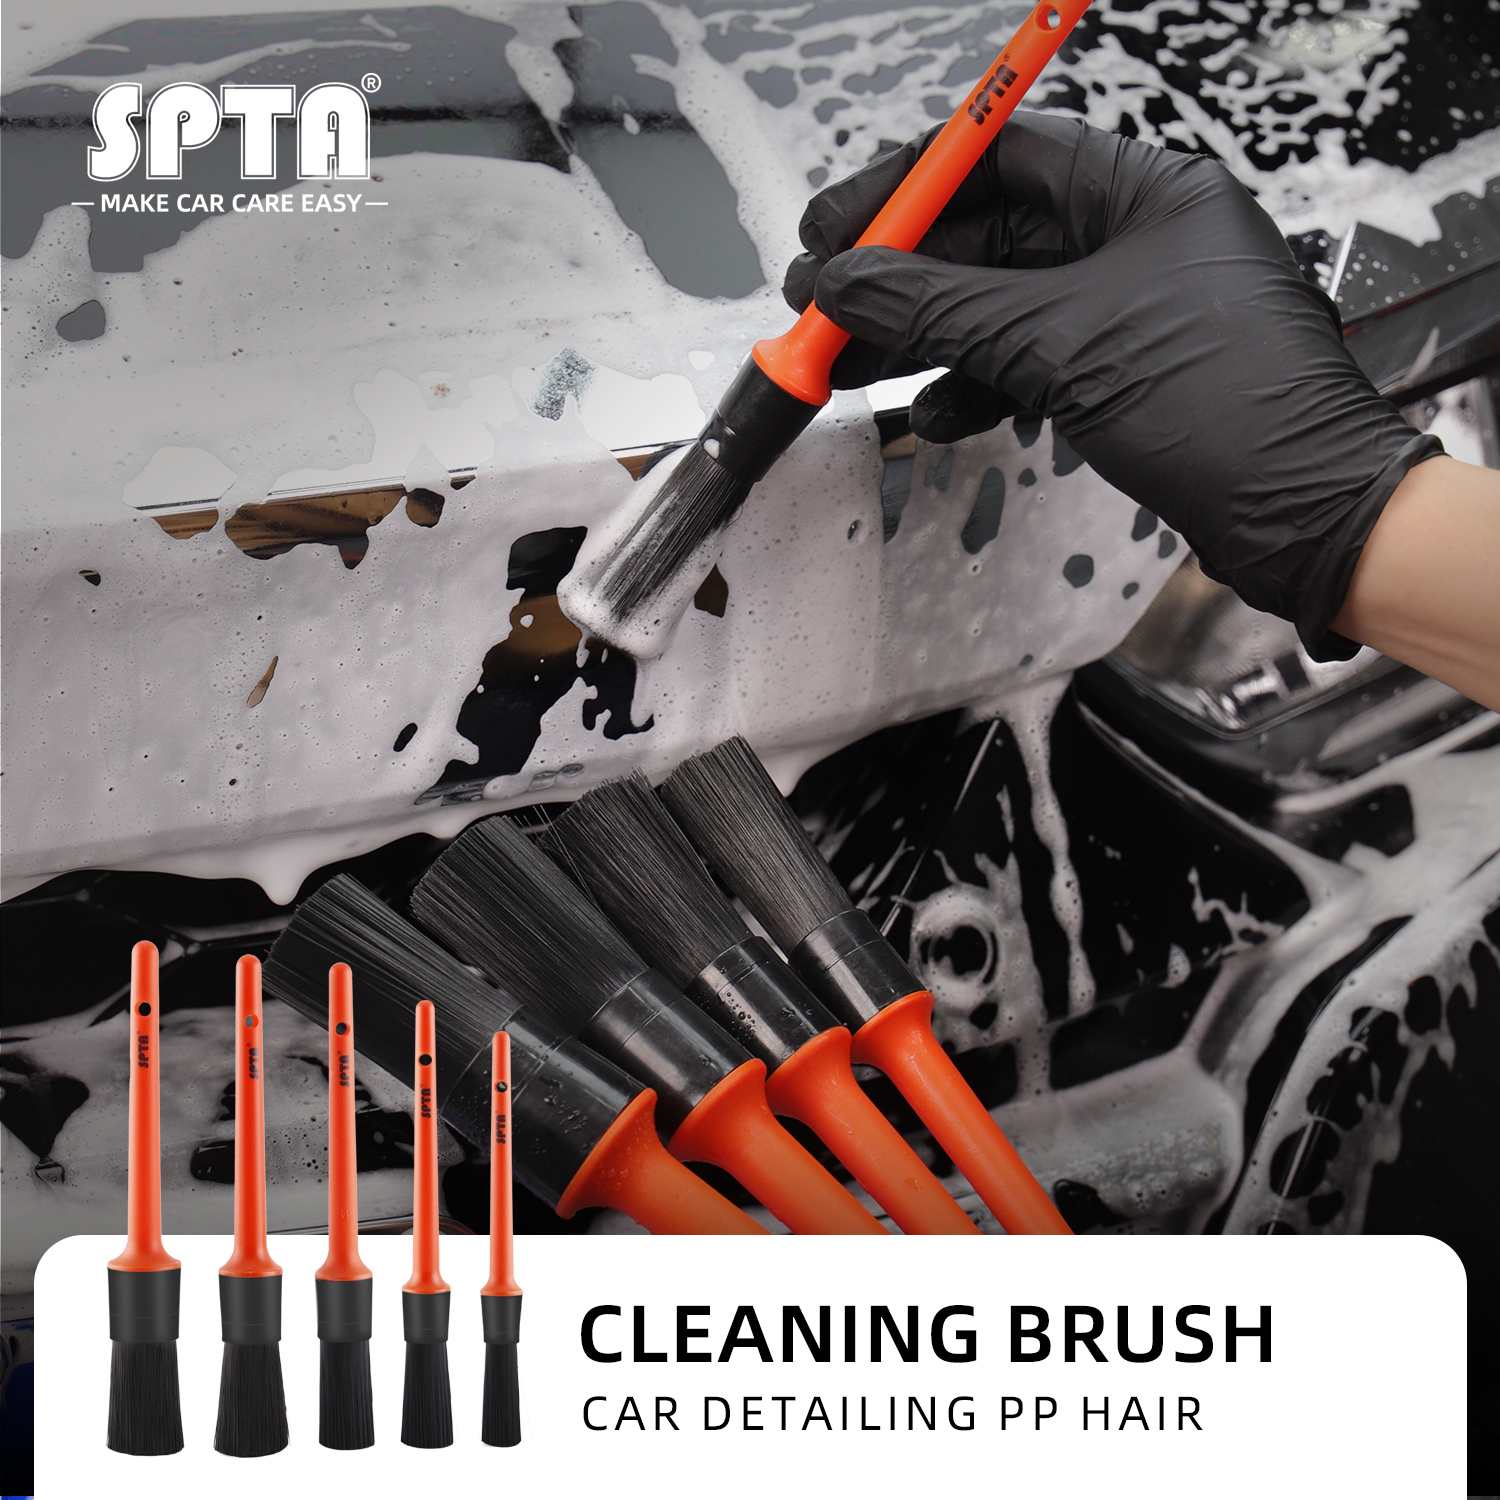 SPTA Car Detailing Brush Set, 5 Pack Soft Boar Hair Auto Detail Brush Kit with Elbow for Automotive Elegant Surface Interior Exterior Dashboard